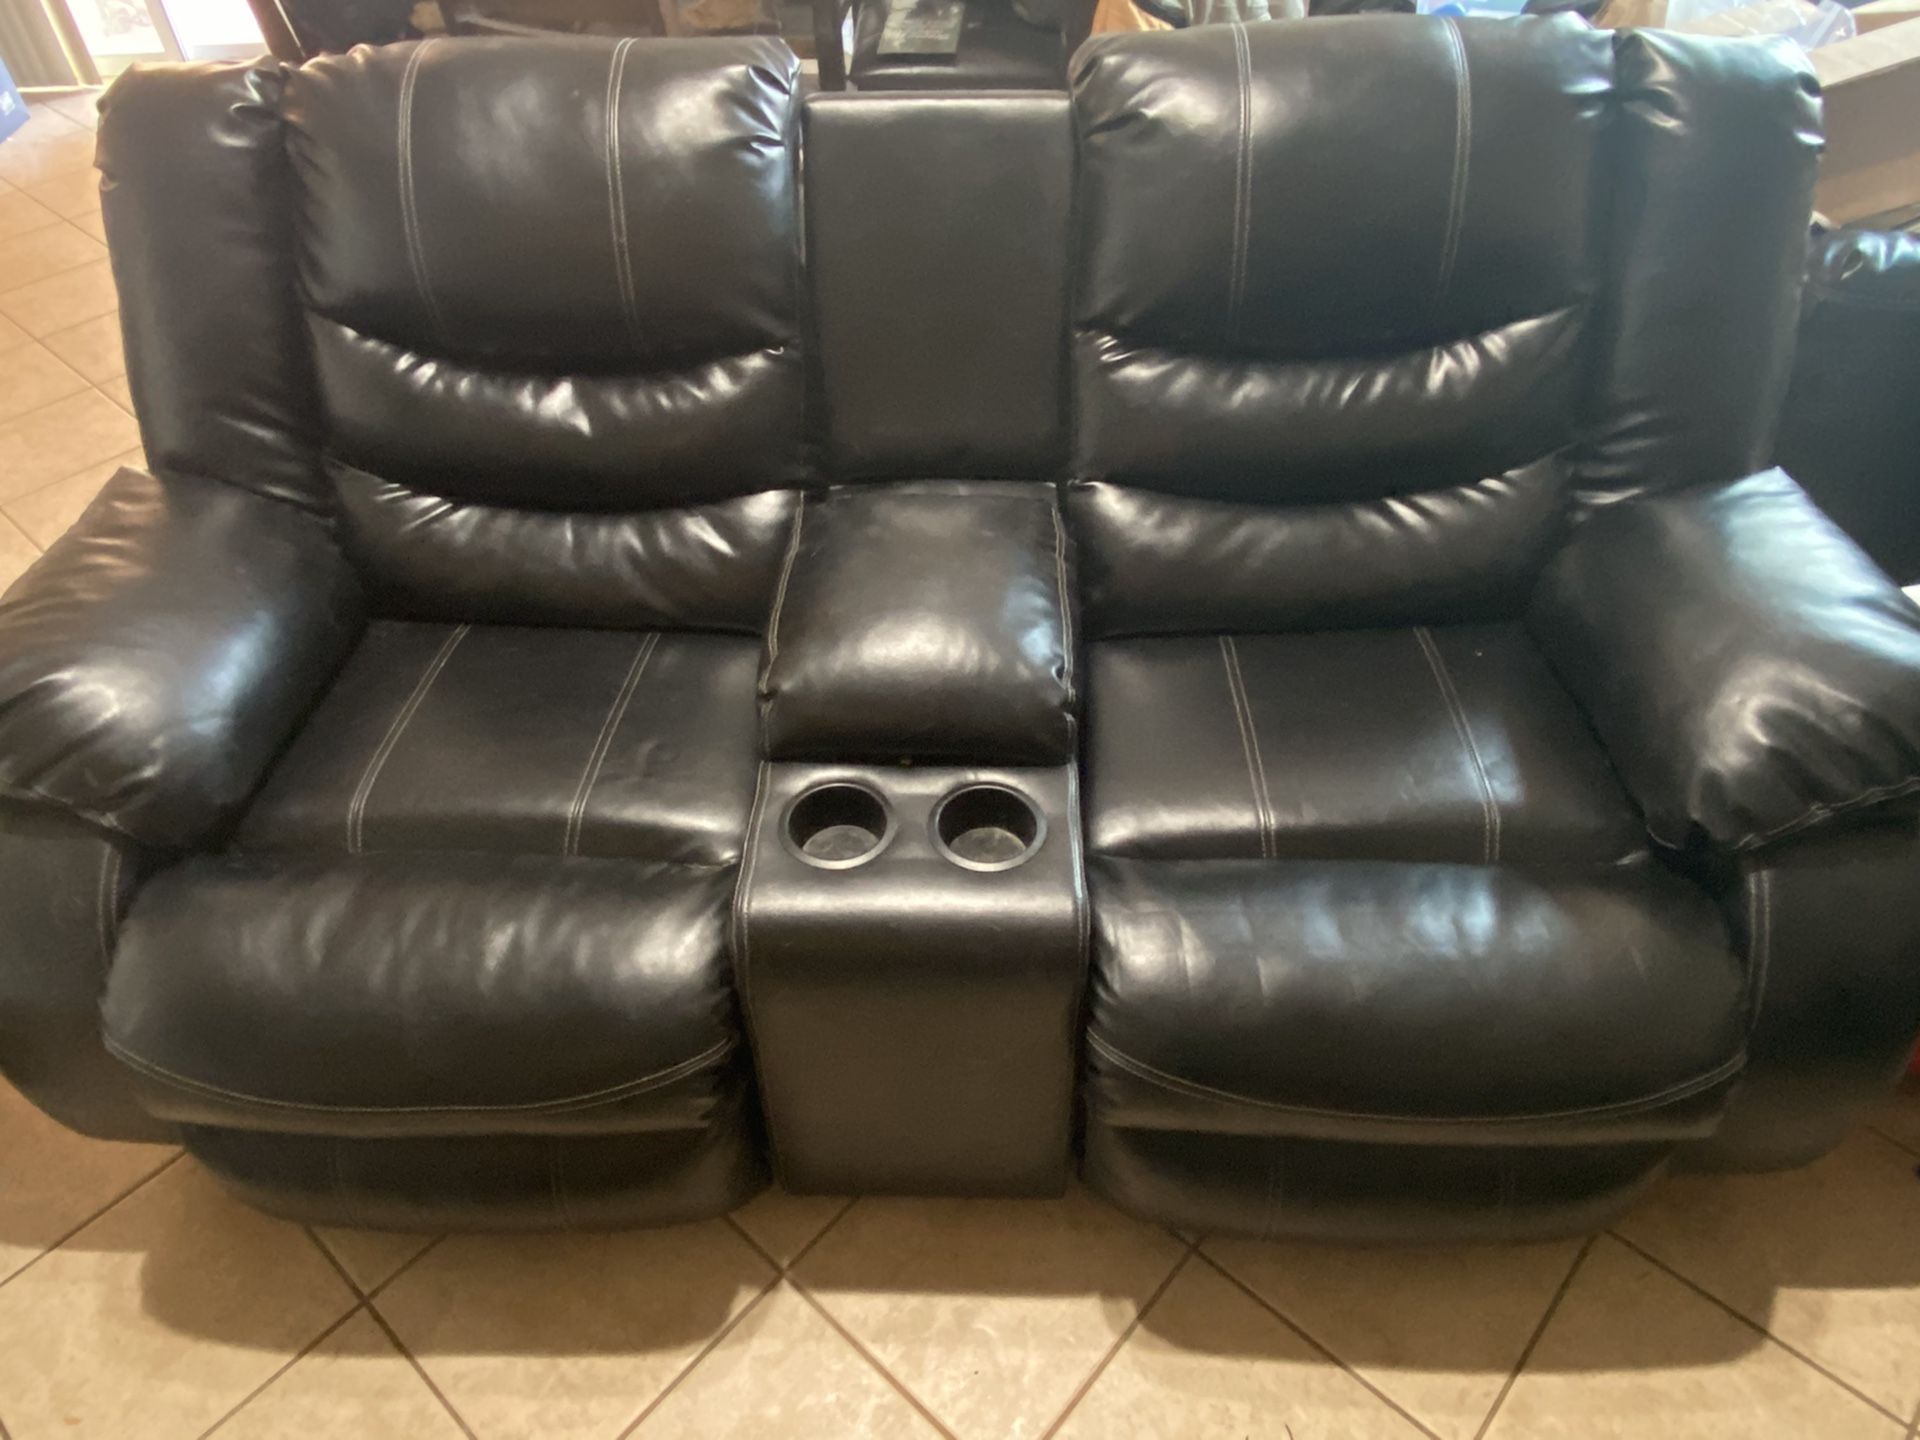 Recliner Love seat and arm chair